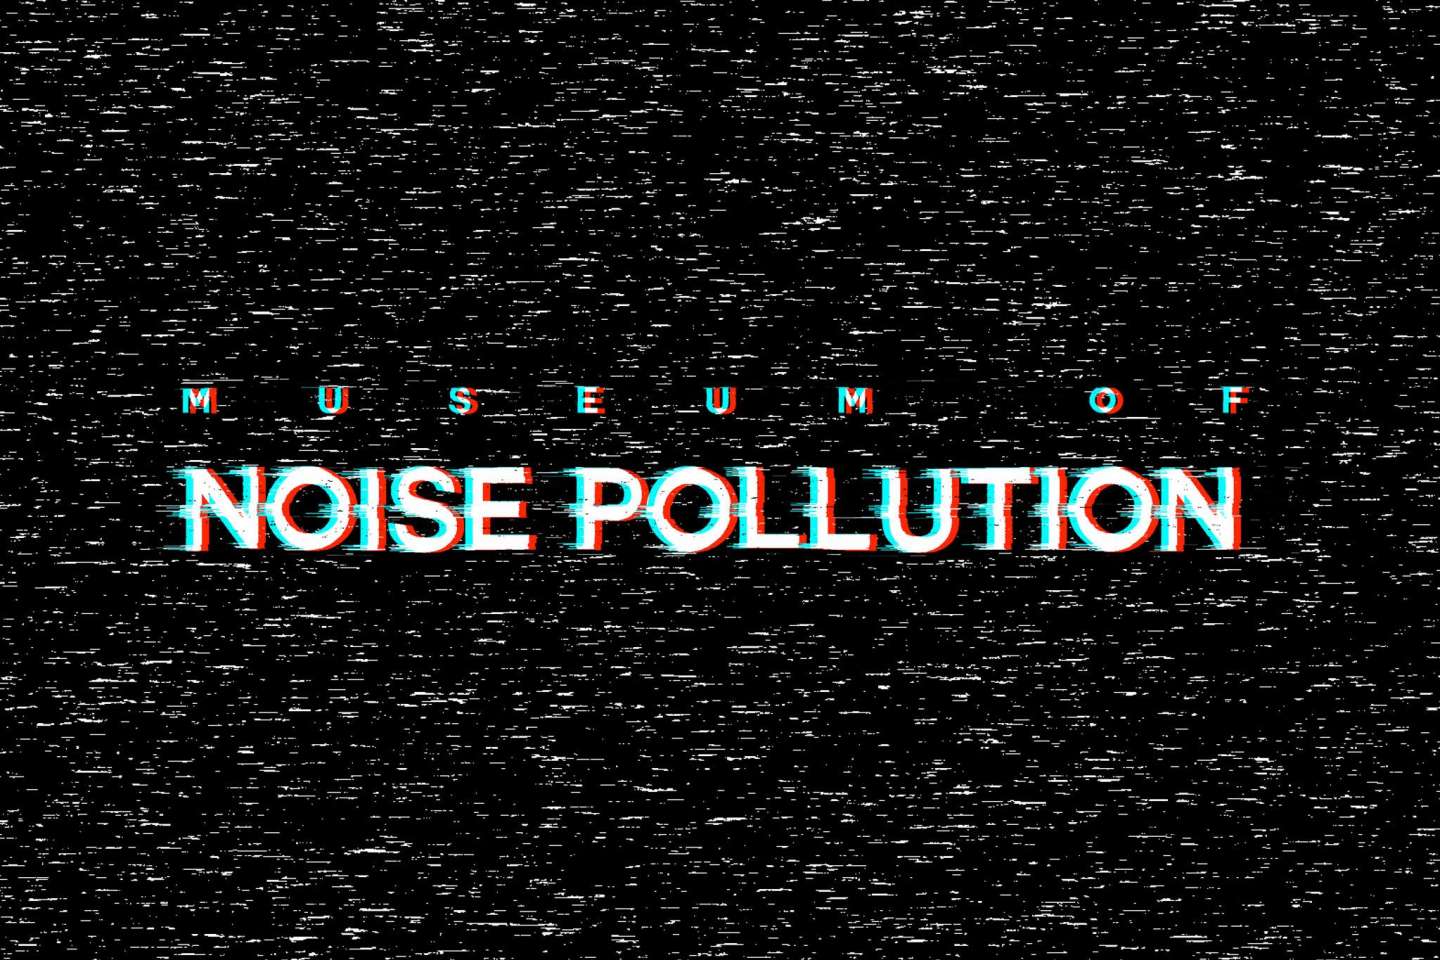 Museum of Noise Pollution